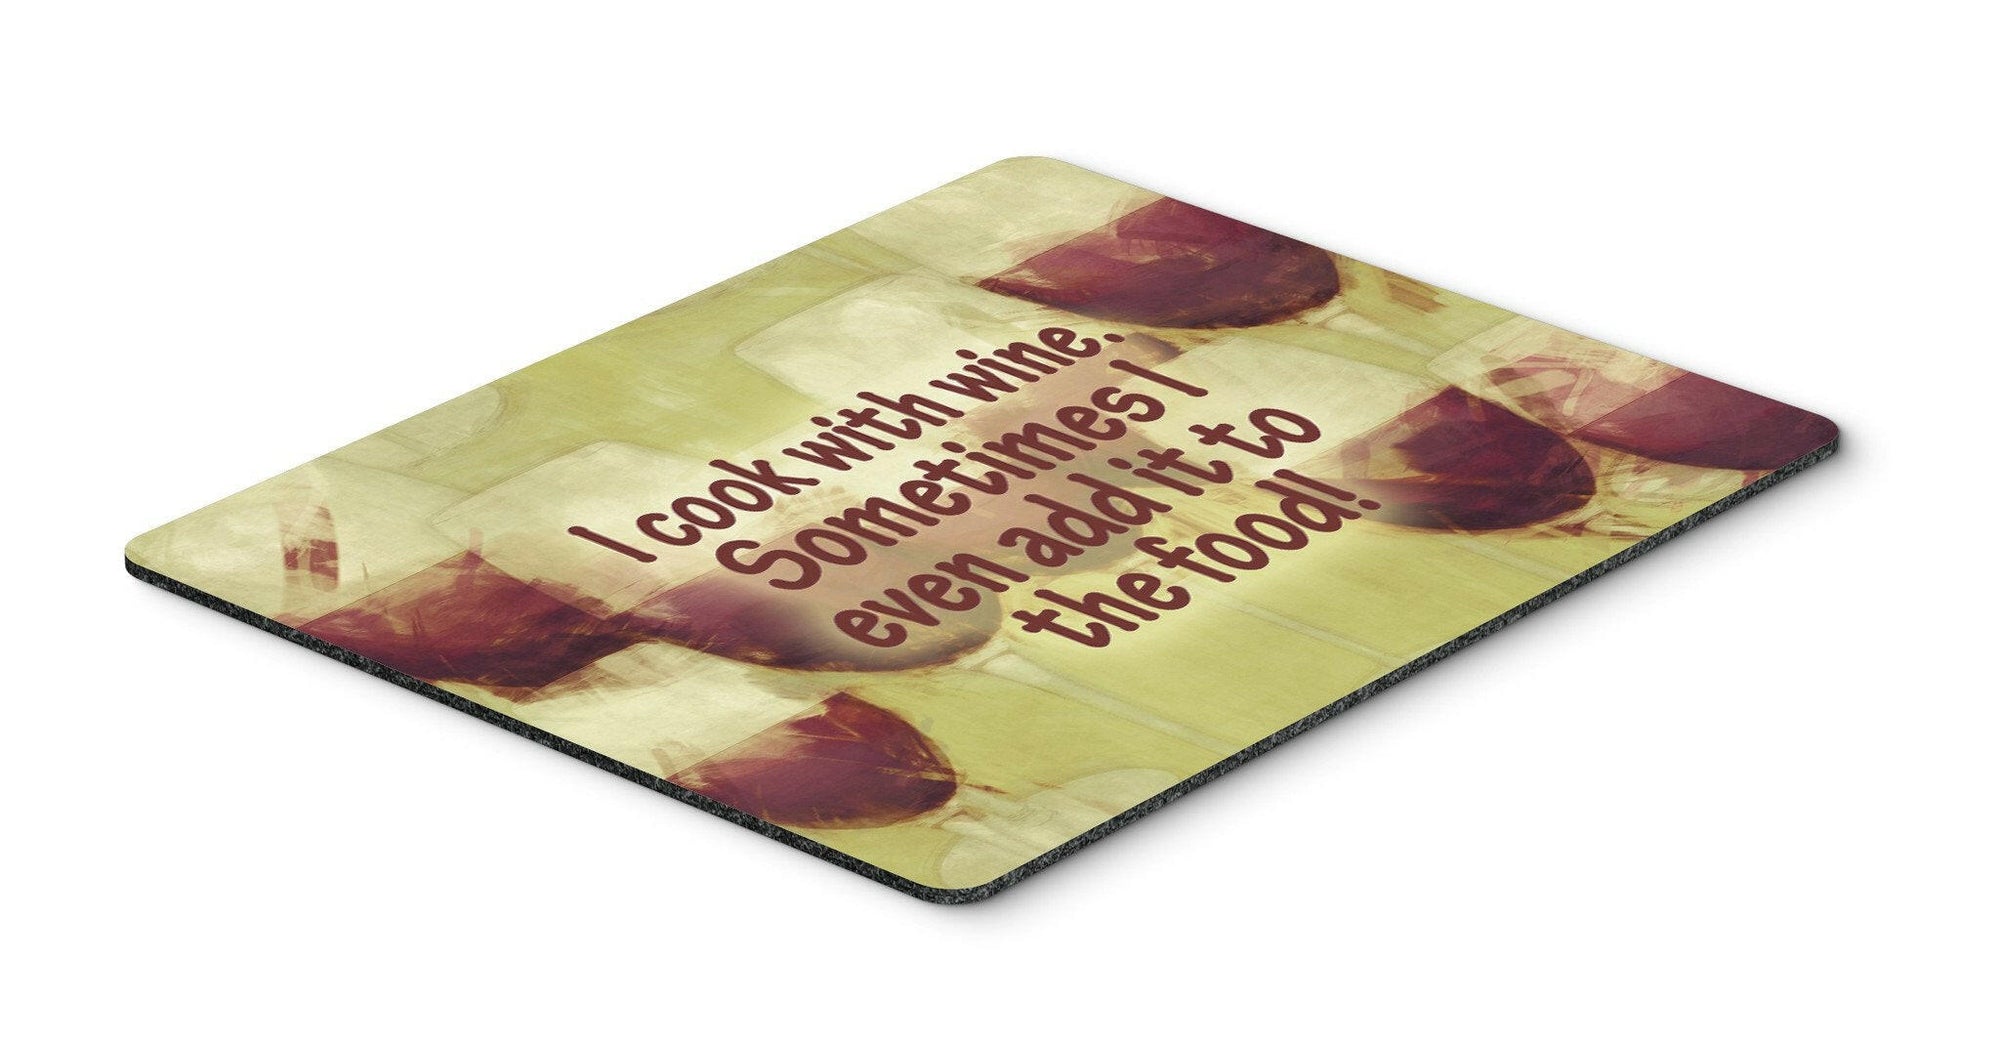 I cook with wine Mouse Pad, Hot Pad or Trivet SB3069MP by Caroline's Treasures